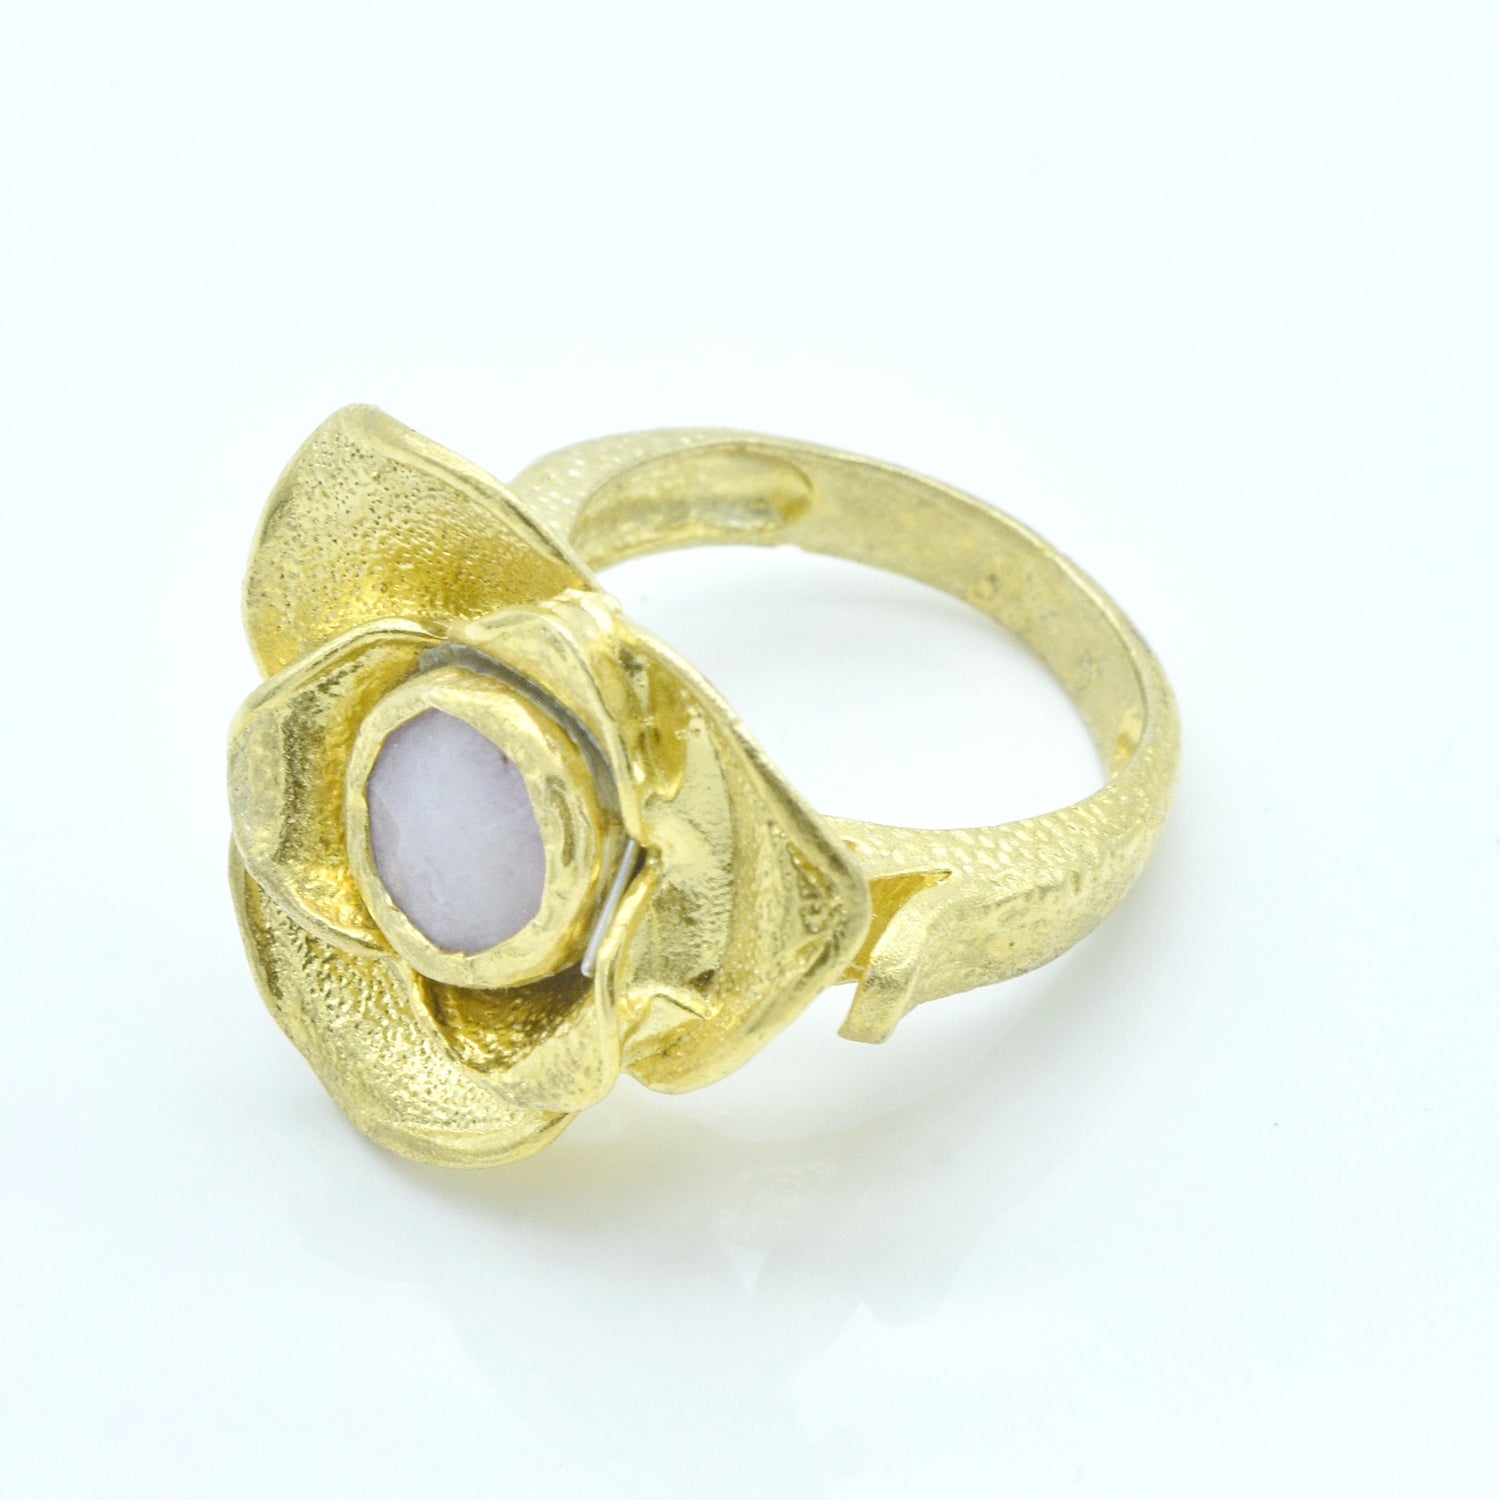 Aylas Agate Rose ring - 21ct Gold plated 925 silver - Handmade in Ottoman Style by Artisan